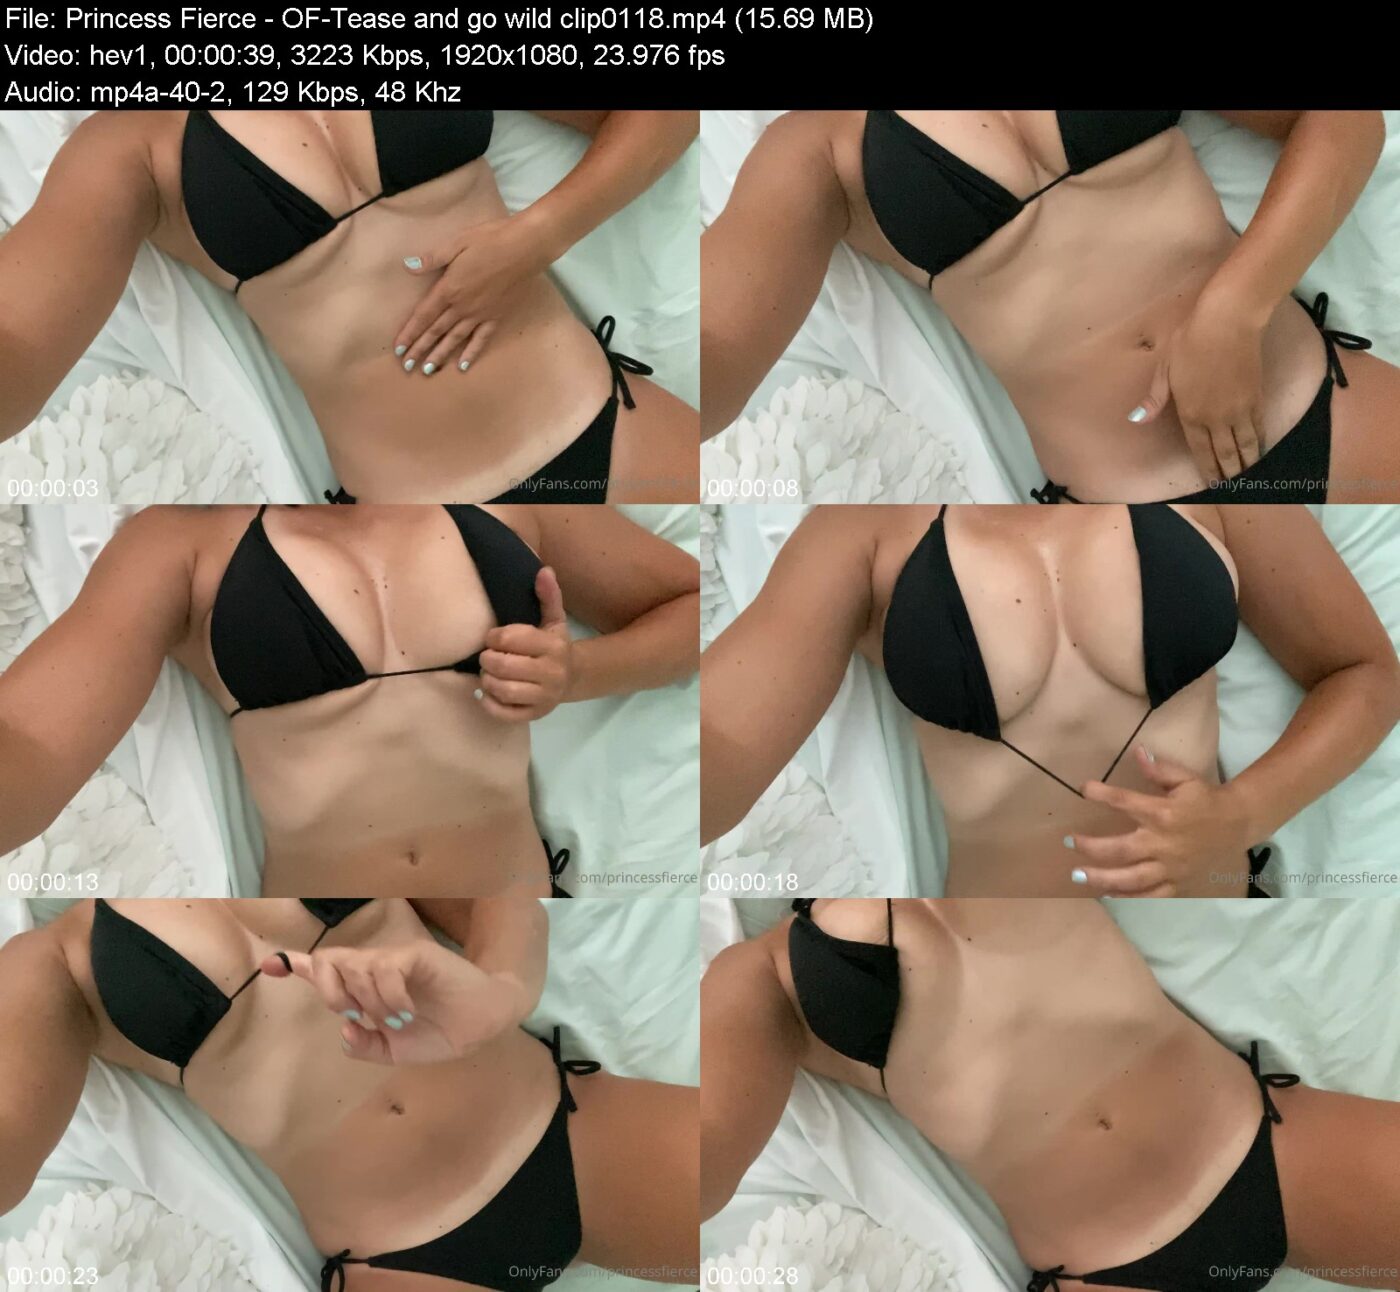 Actress: Princess Fierce. Title and Studio: OF-Tease and go wild clip0118